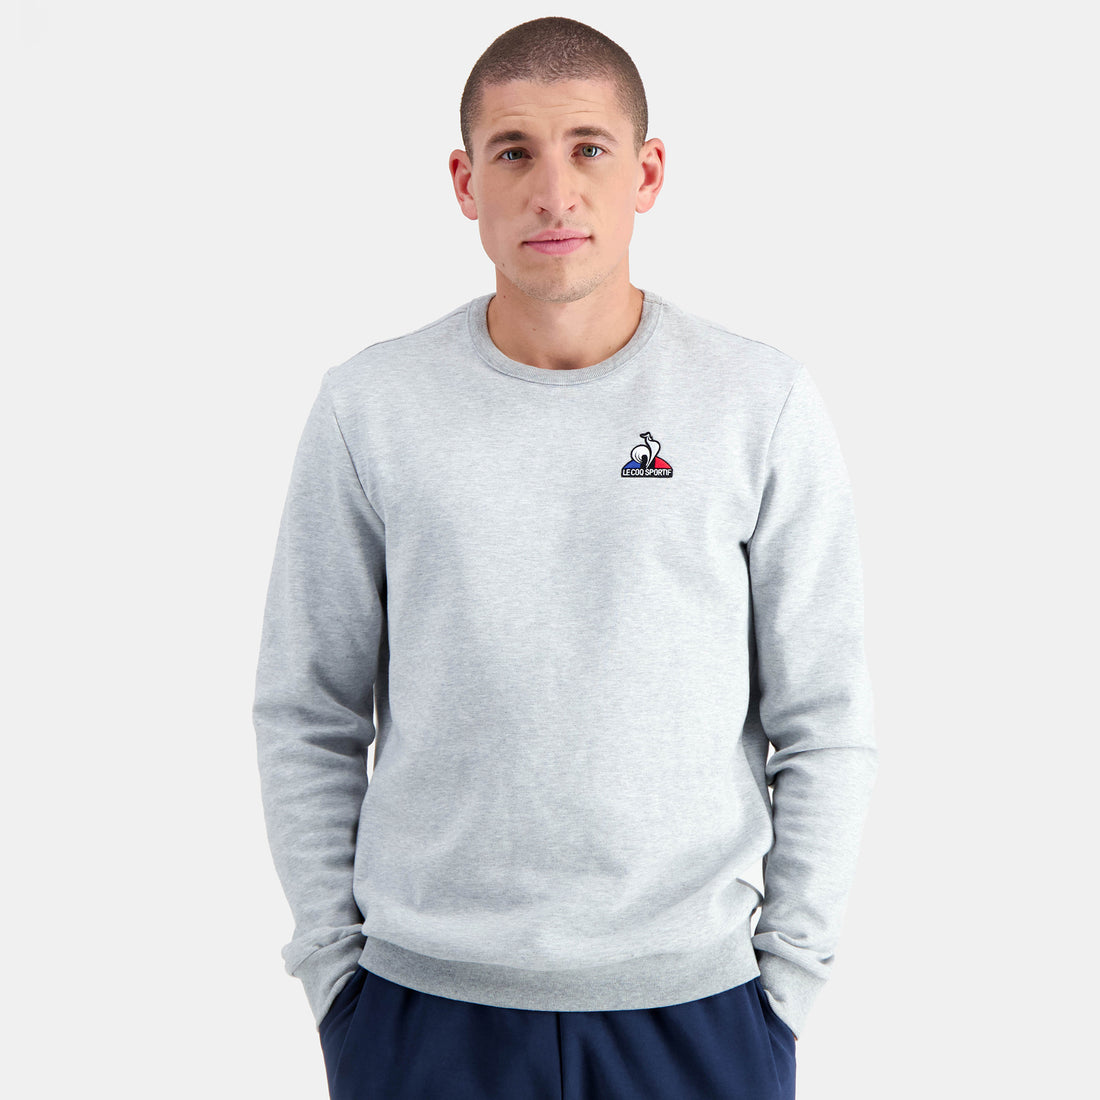 2310559-ESS Crew Sweat N°4 M gris chiné clair | Sweat col rond Homme